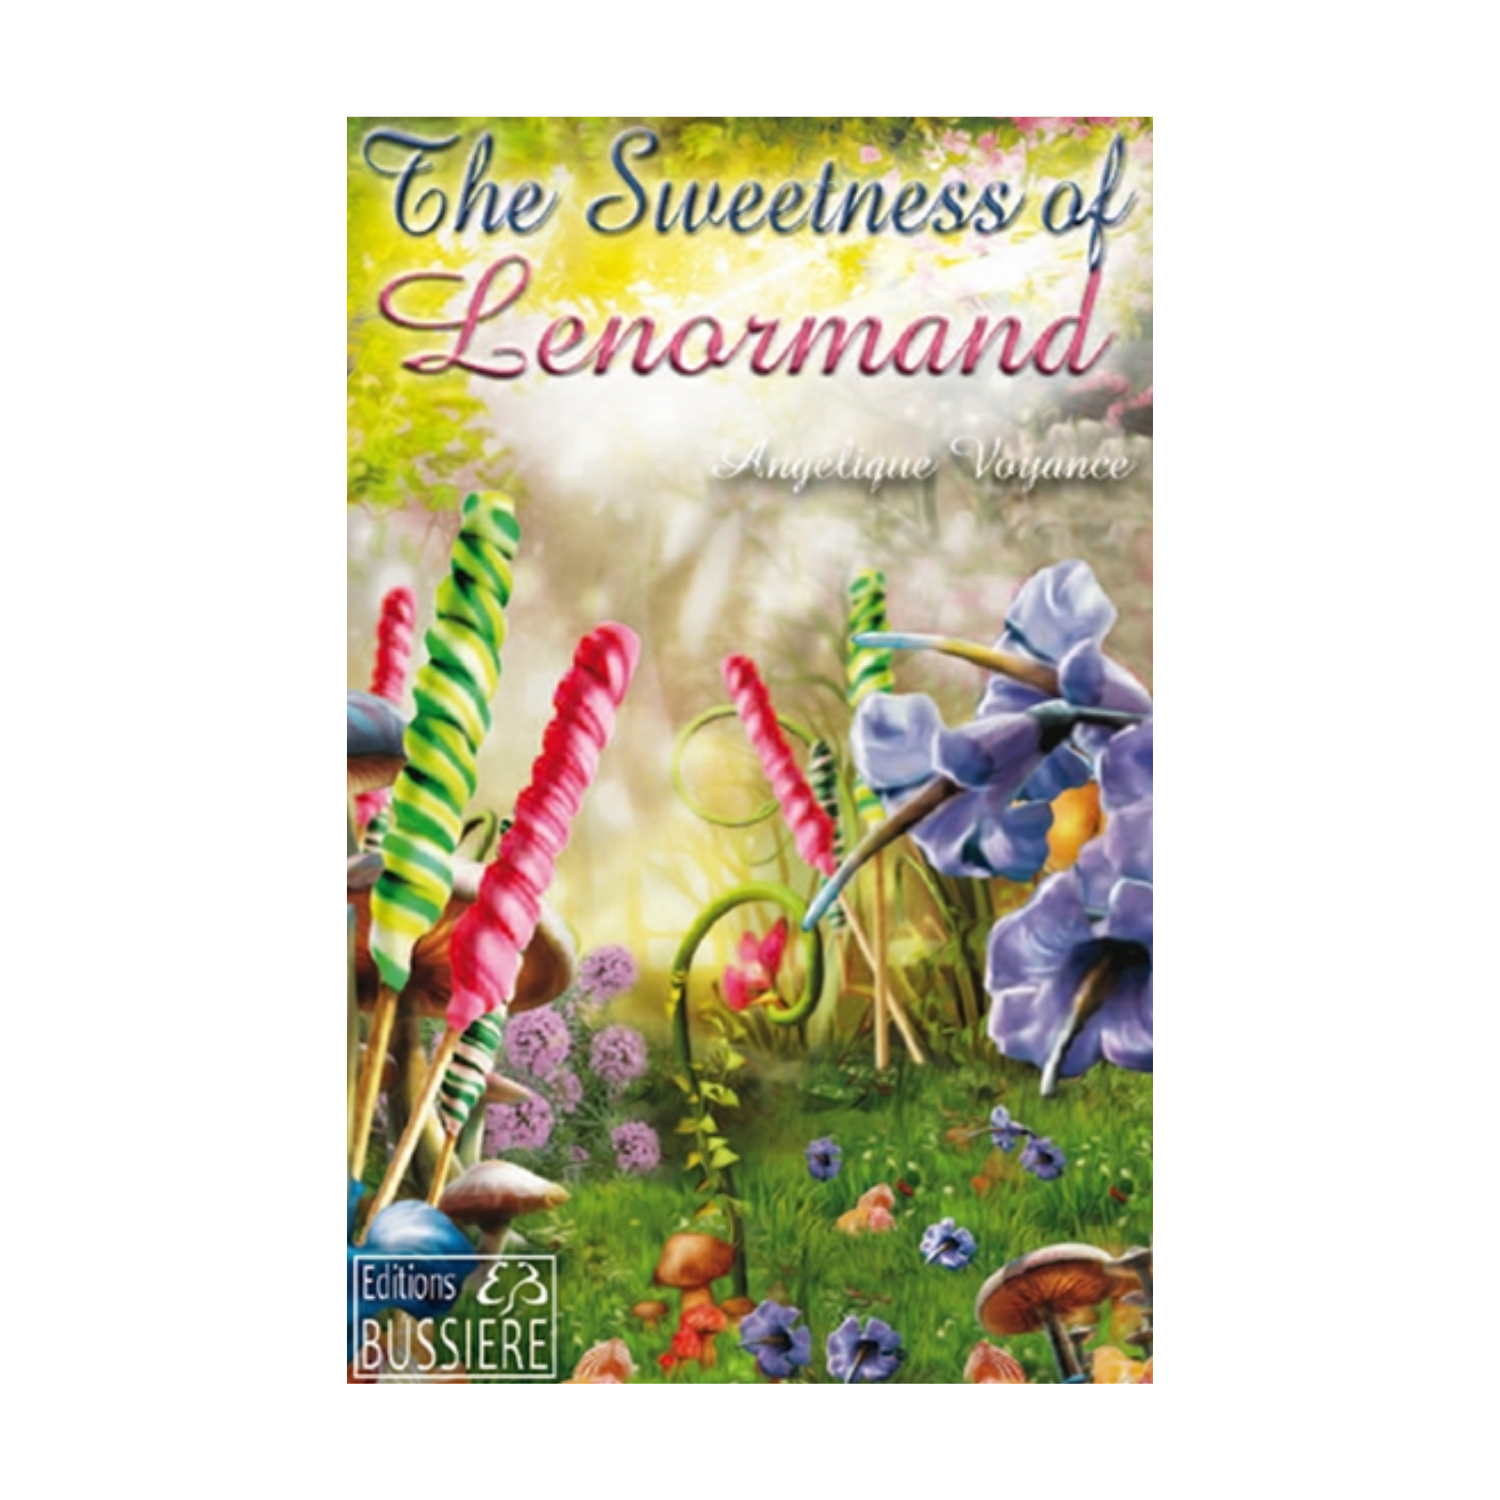 The Sweetness of Lenormand